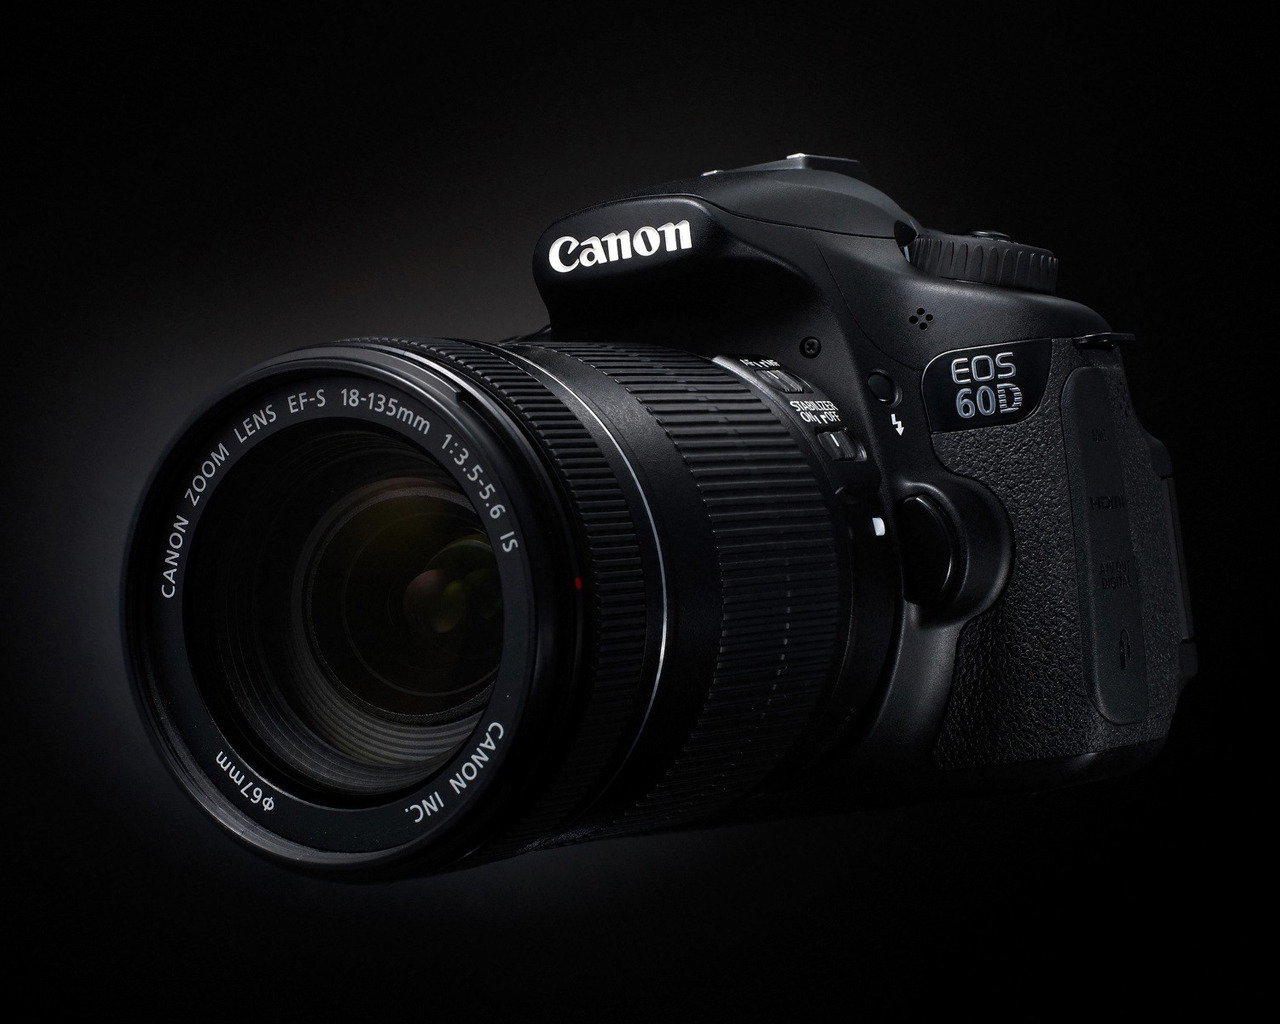 Canon EOS 60D for 1280 x 1024 resolution